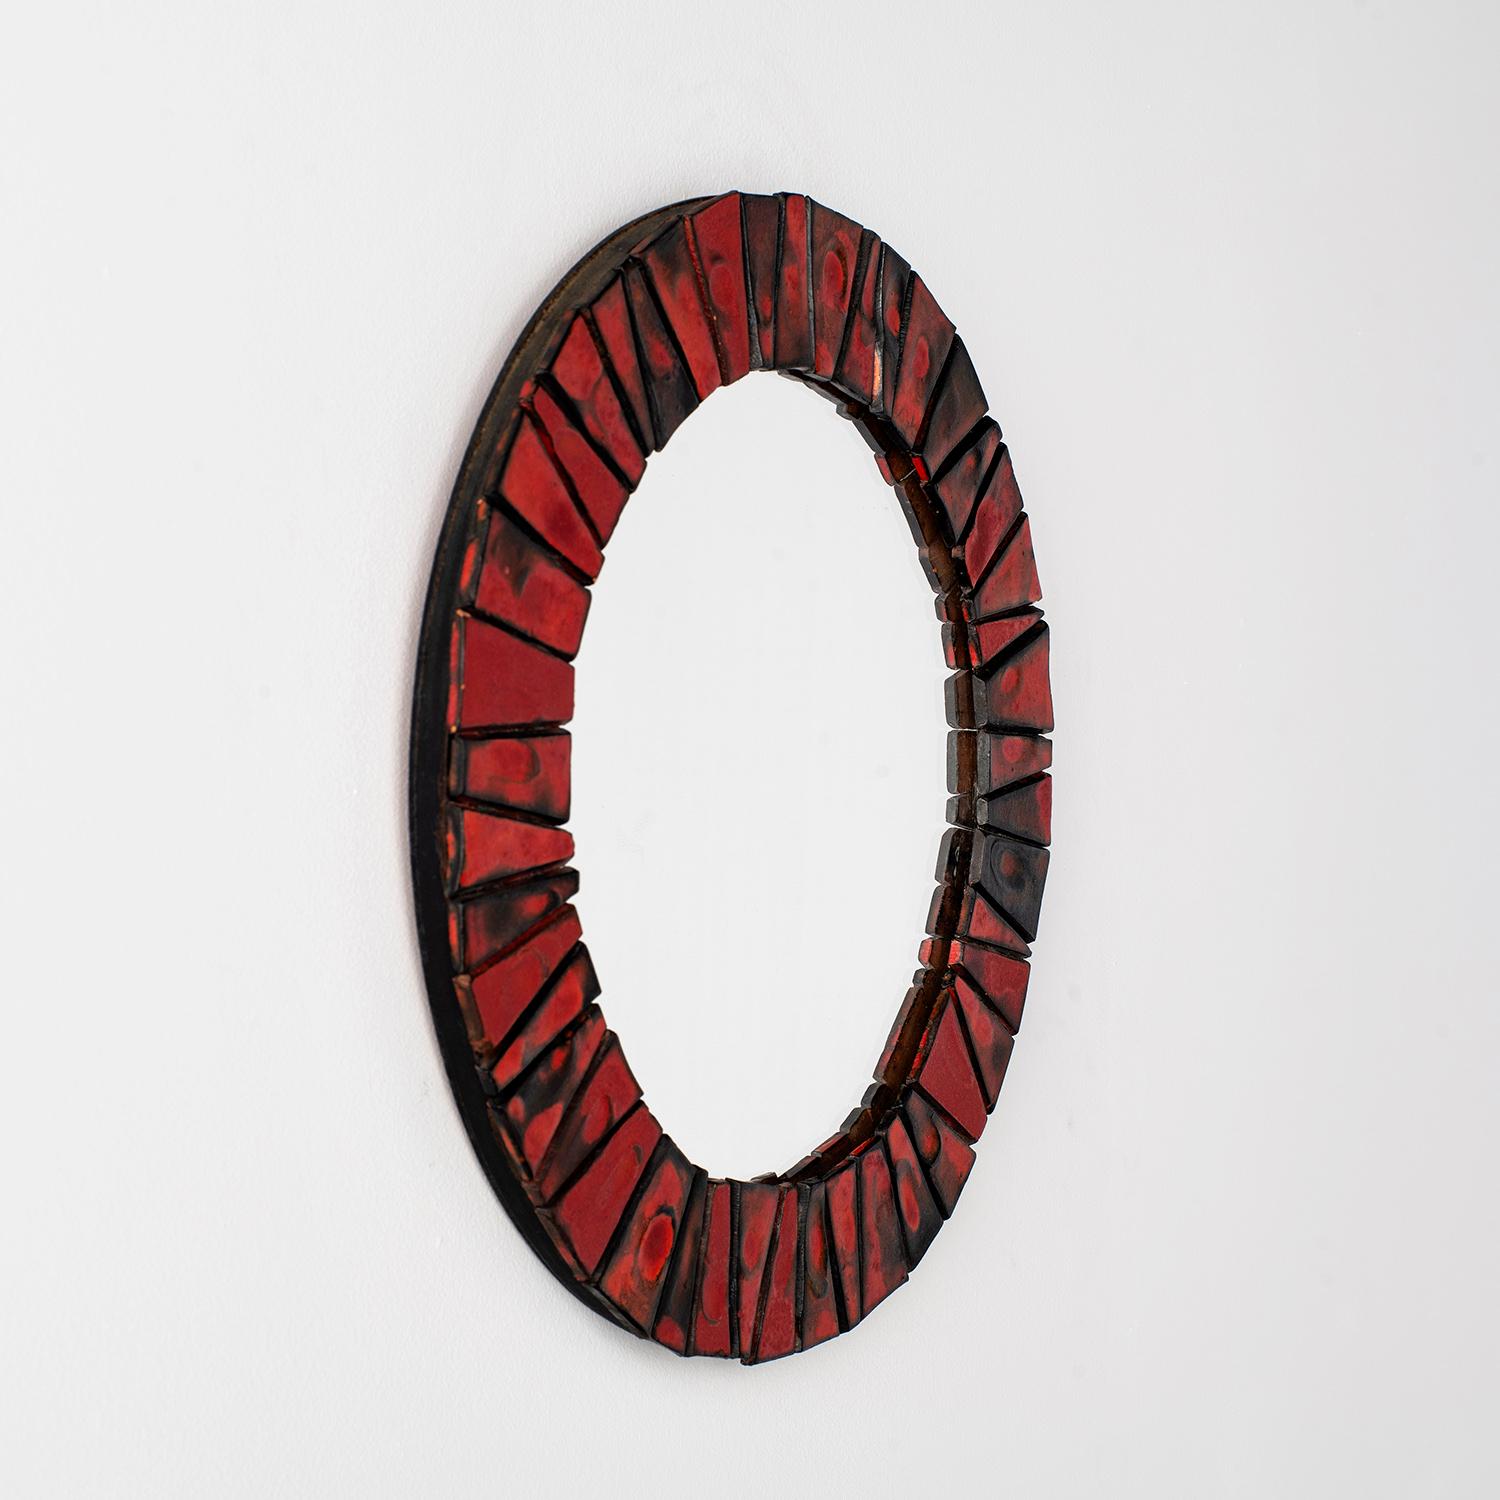 Organic Ceramic Tiled Mirror
Germany, circa 1970’s
Dynamic statement piece
Vibrant red and black lava pattern
Each tile has a unique swirl design
Light surface markings 
Patina from age and use